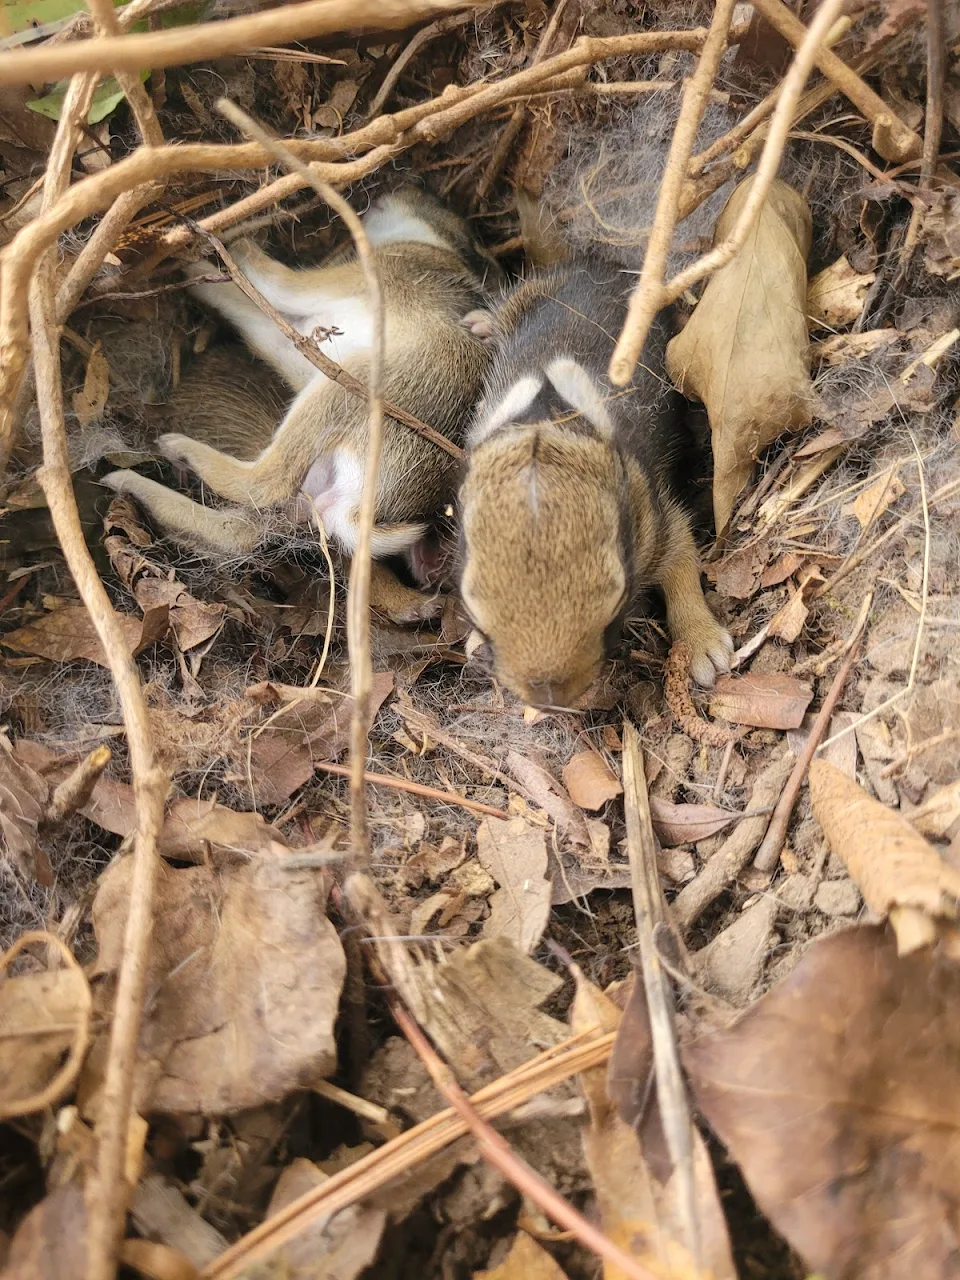 Baby bunnies we found in a nest in my back yard